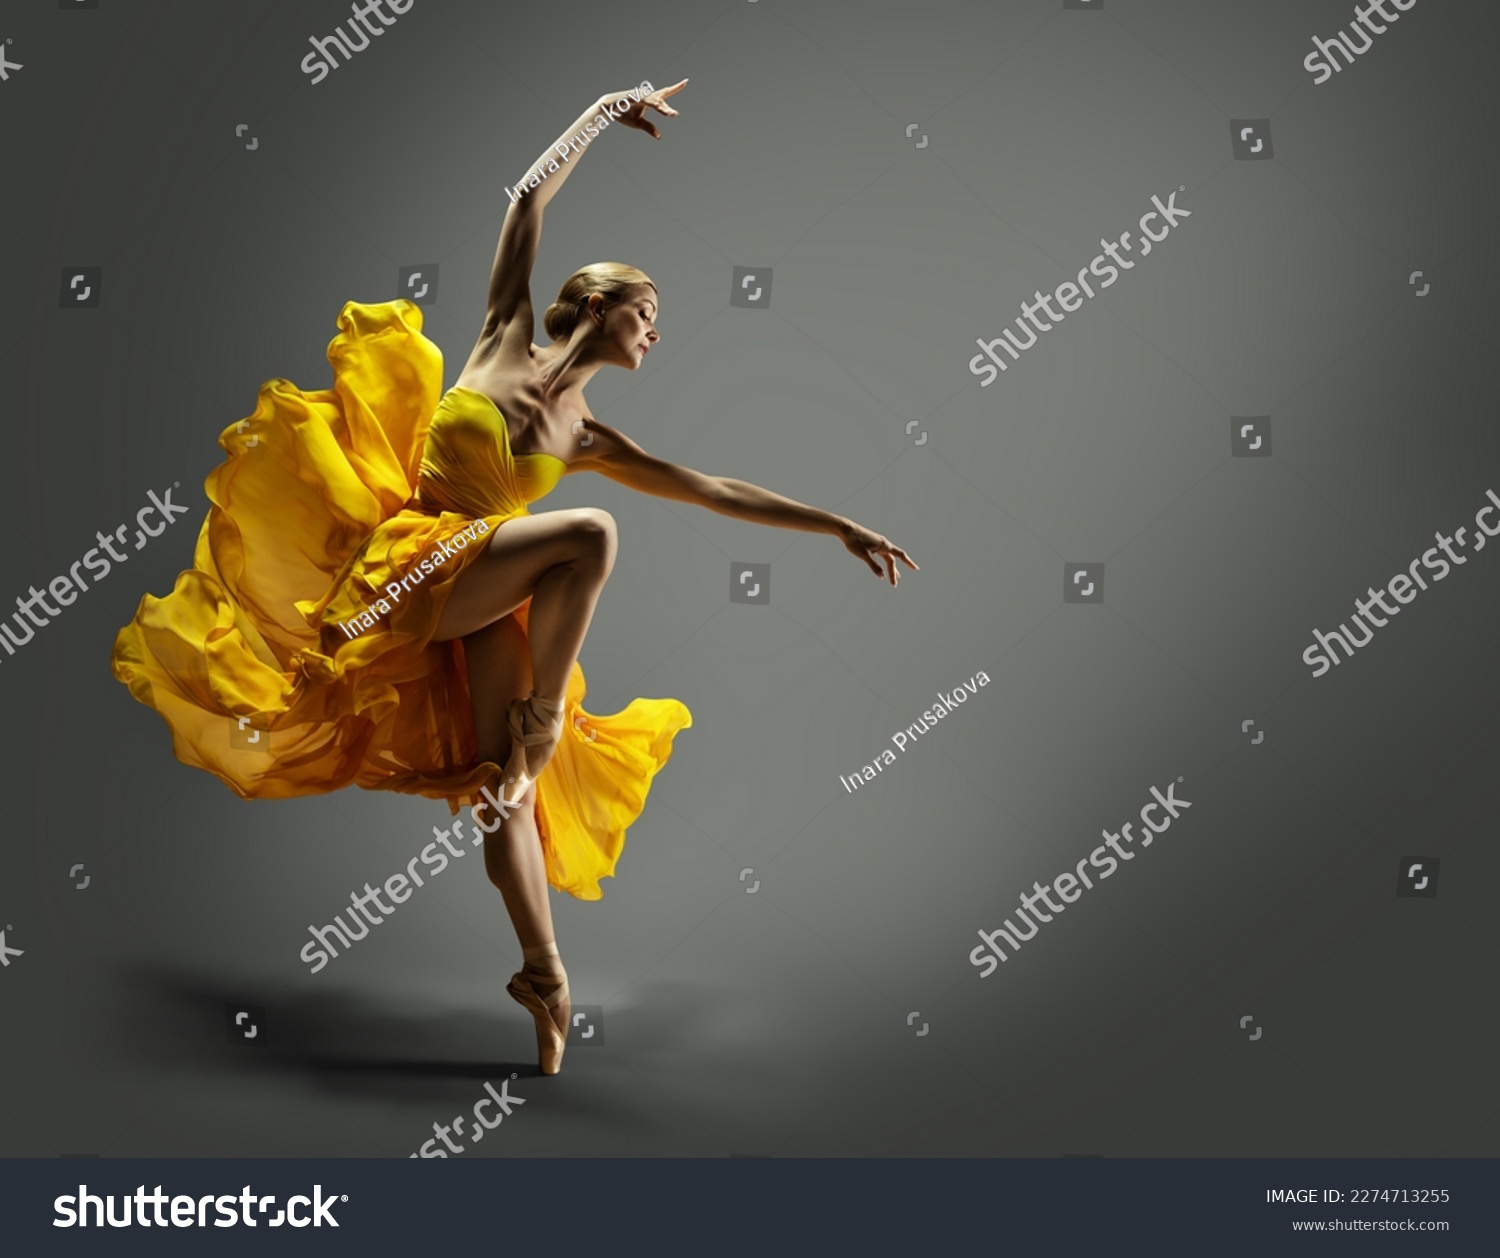 Ballerina in Yellow Chiffon Dress dancing over Gray Background. Ballet Dancer jumping in Air in Silk Gown. Modern Dance Graceful Woman performing in flying Skirt #2274713255